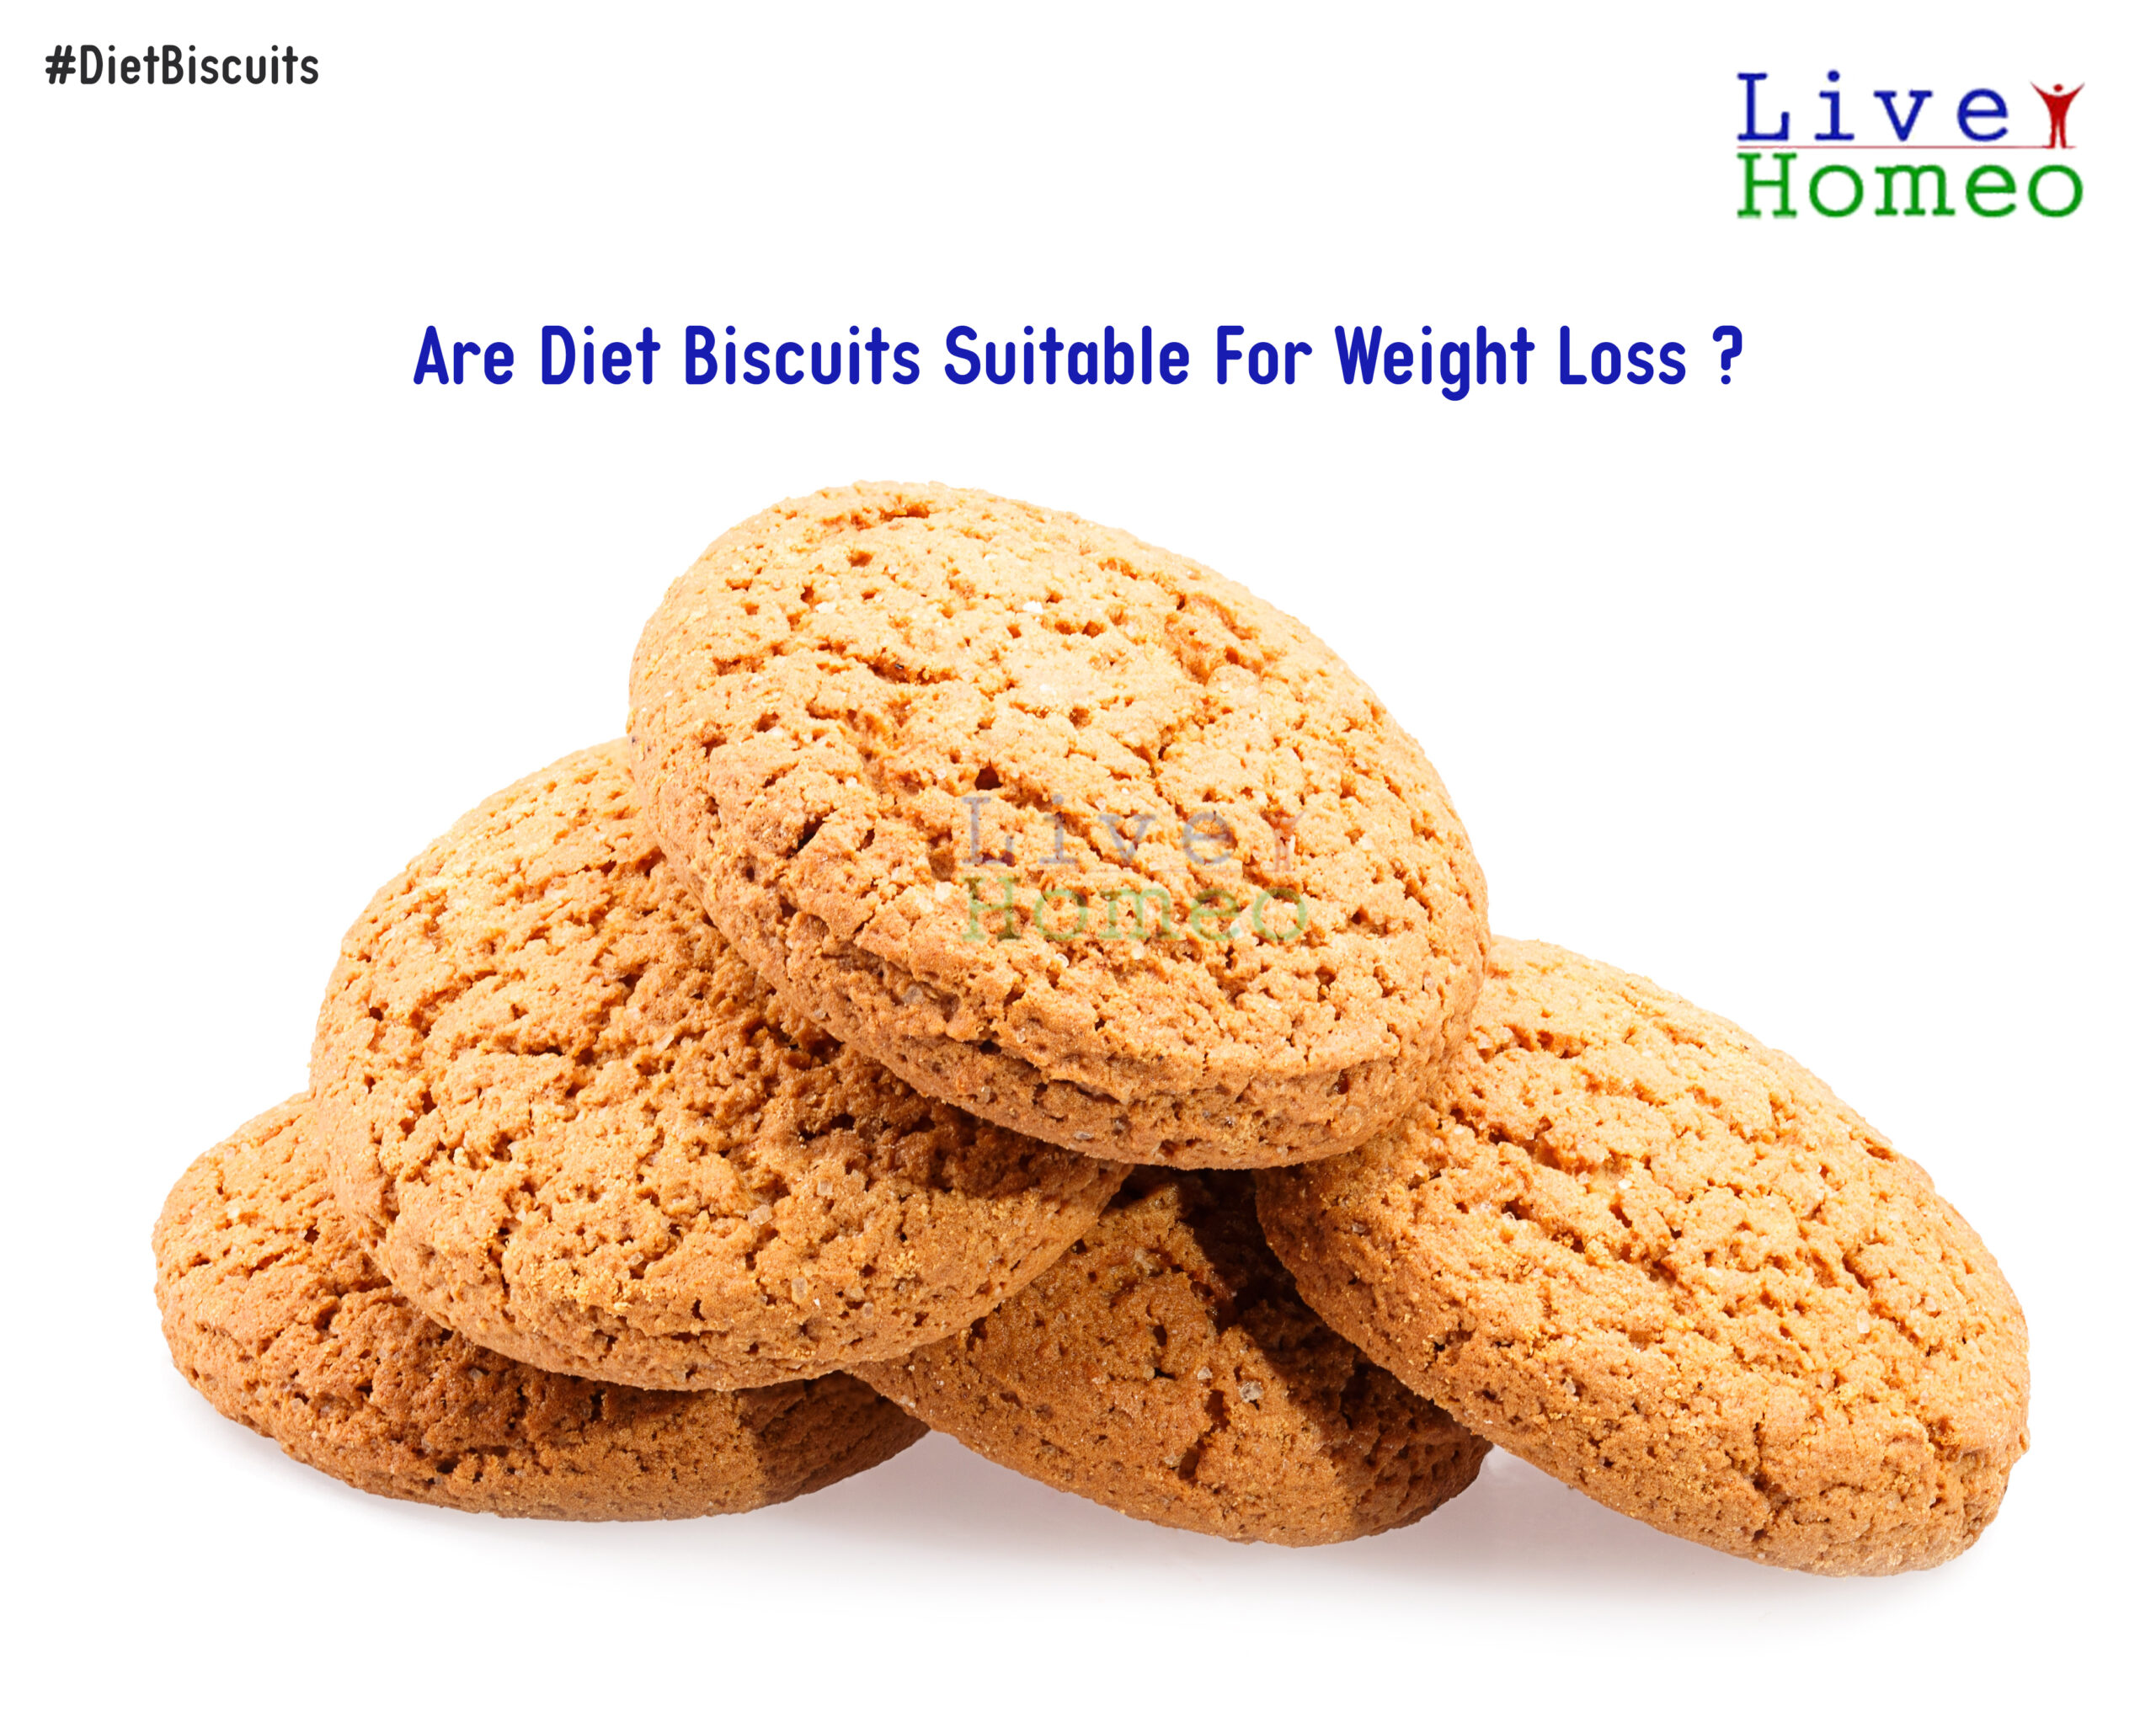 Are diet biscuits suitable for weight loss